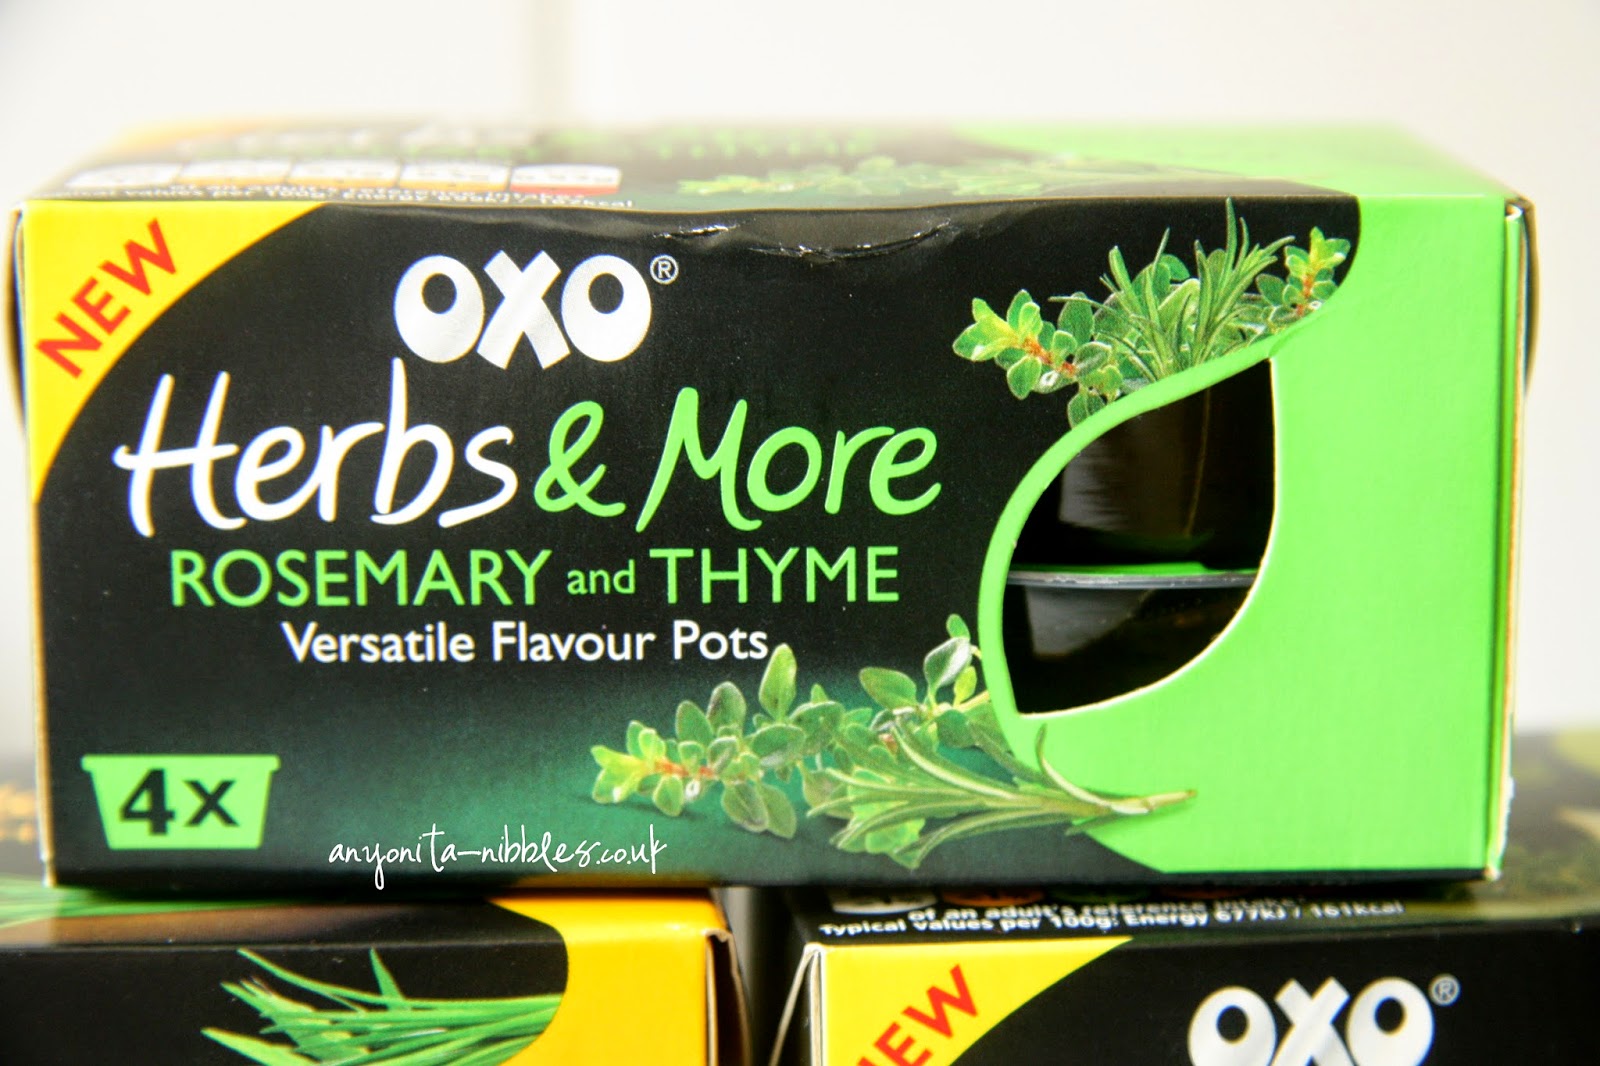 OXO Herbs & More Rosemary & Thyme Flavour Pots from anyonita-nibbles.co.uk